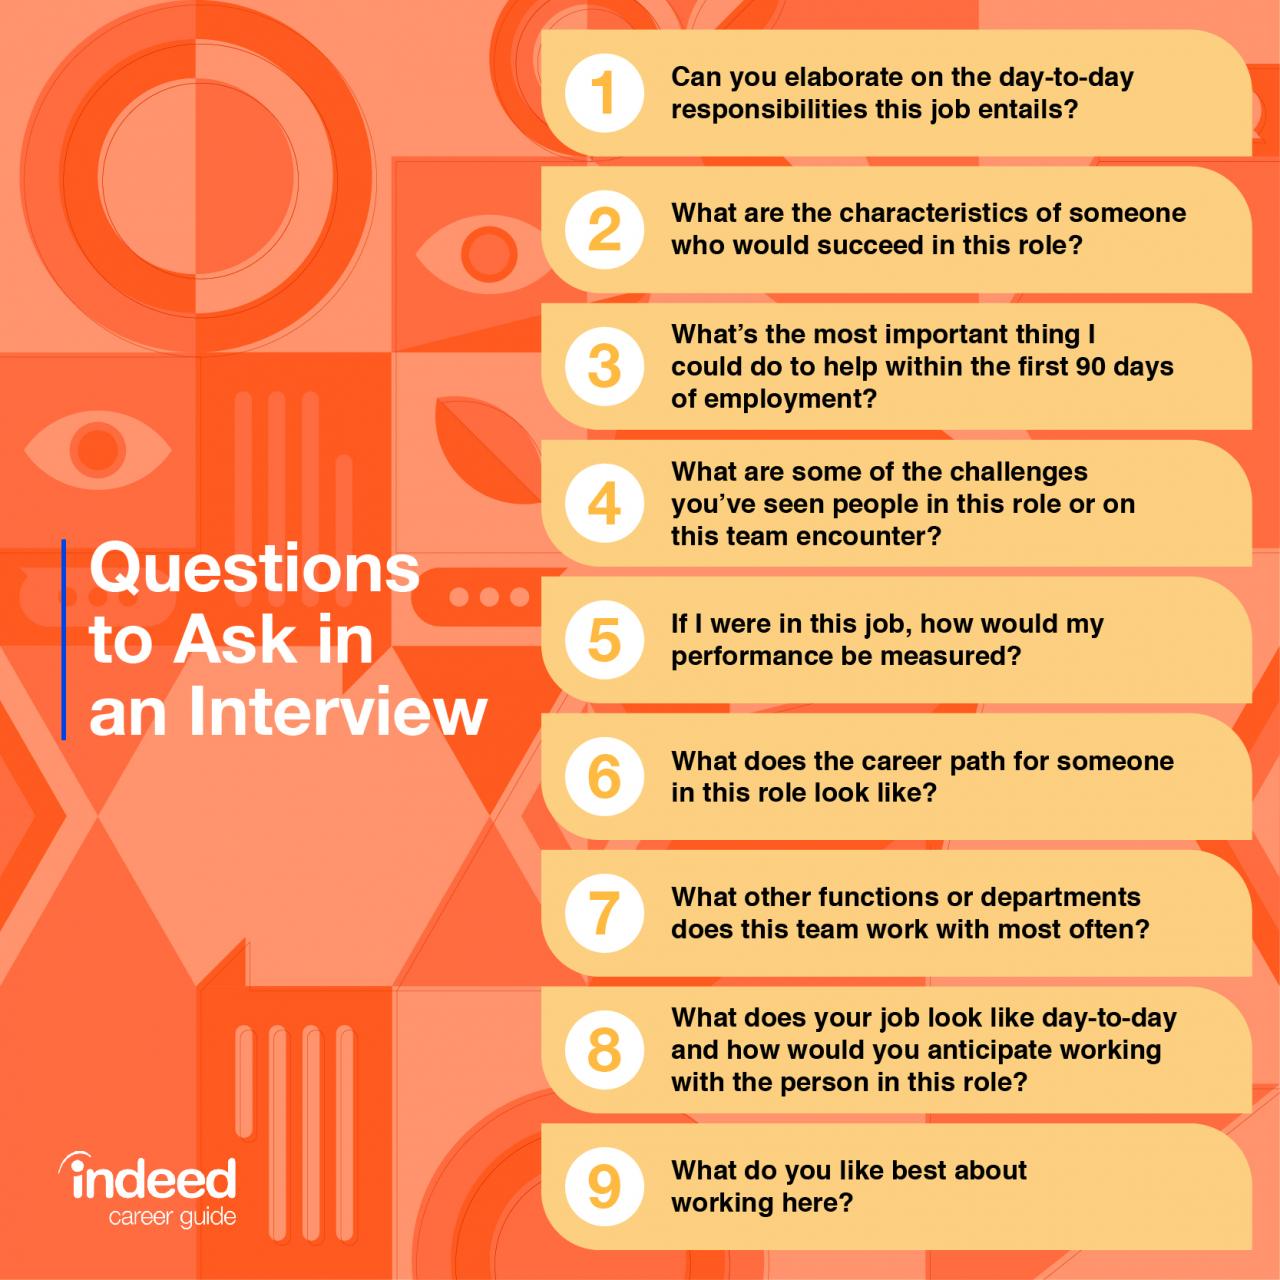 Executive questions to ask during an interview